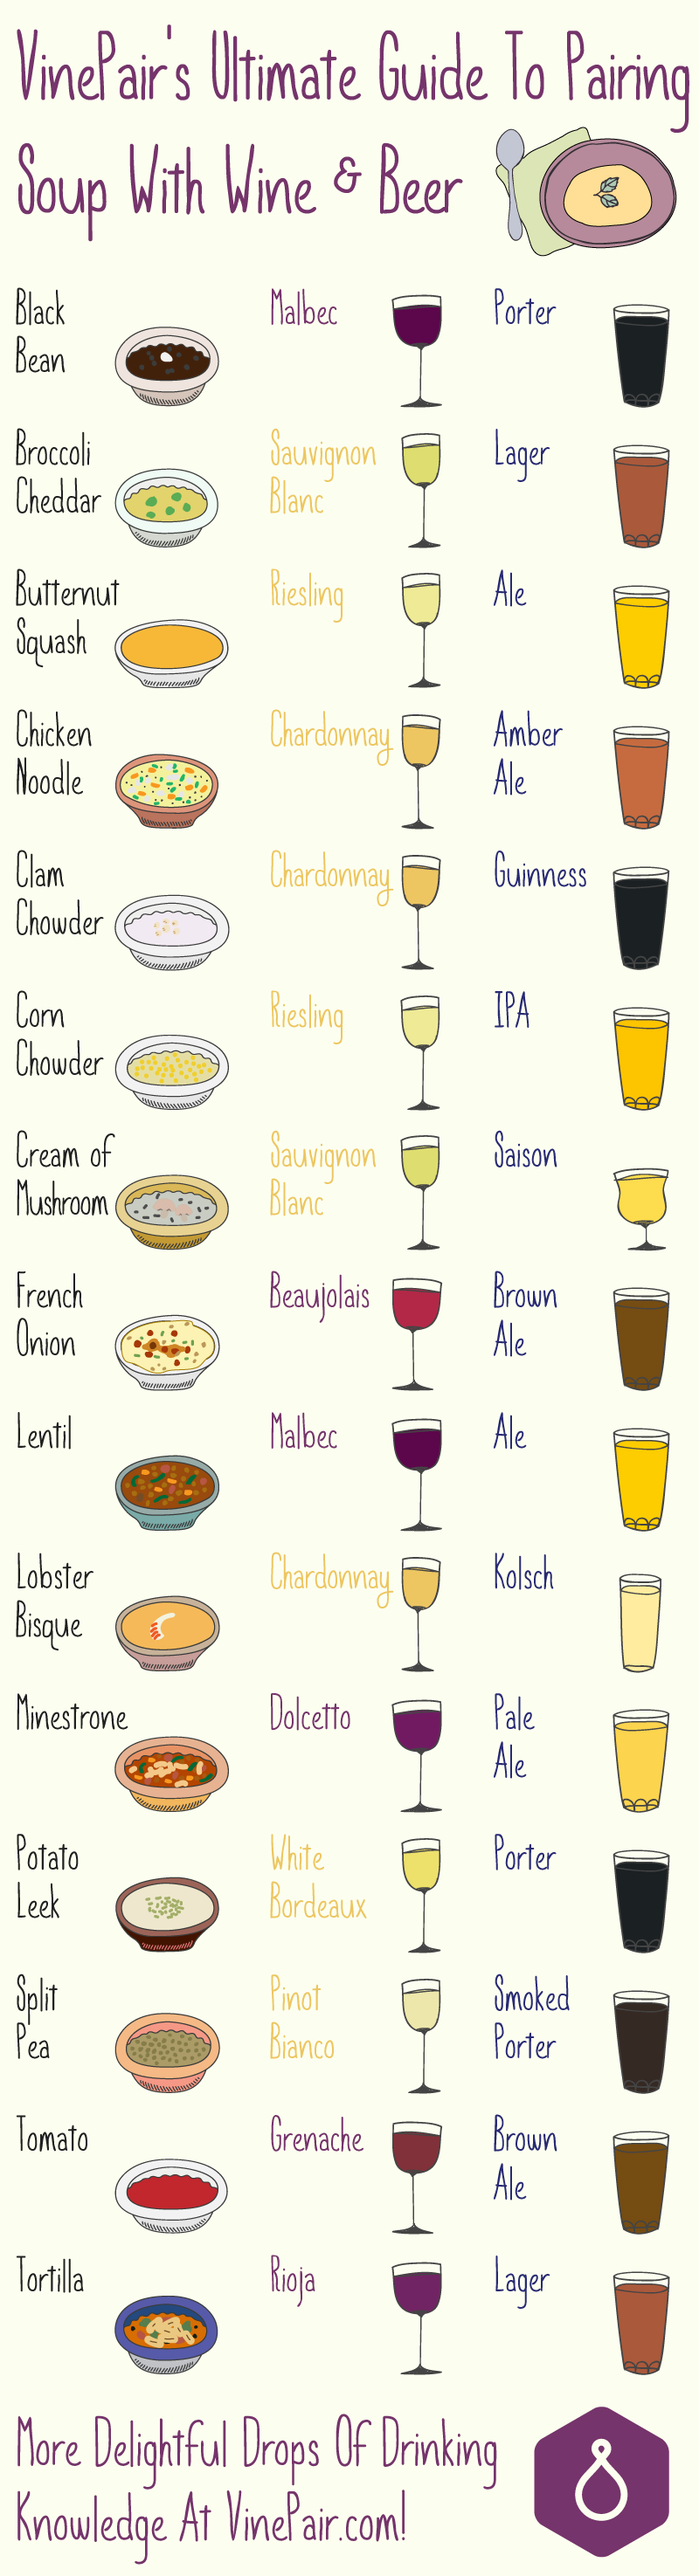 soup-beer-wine-pairing-guide-infographic